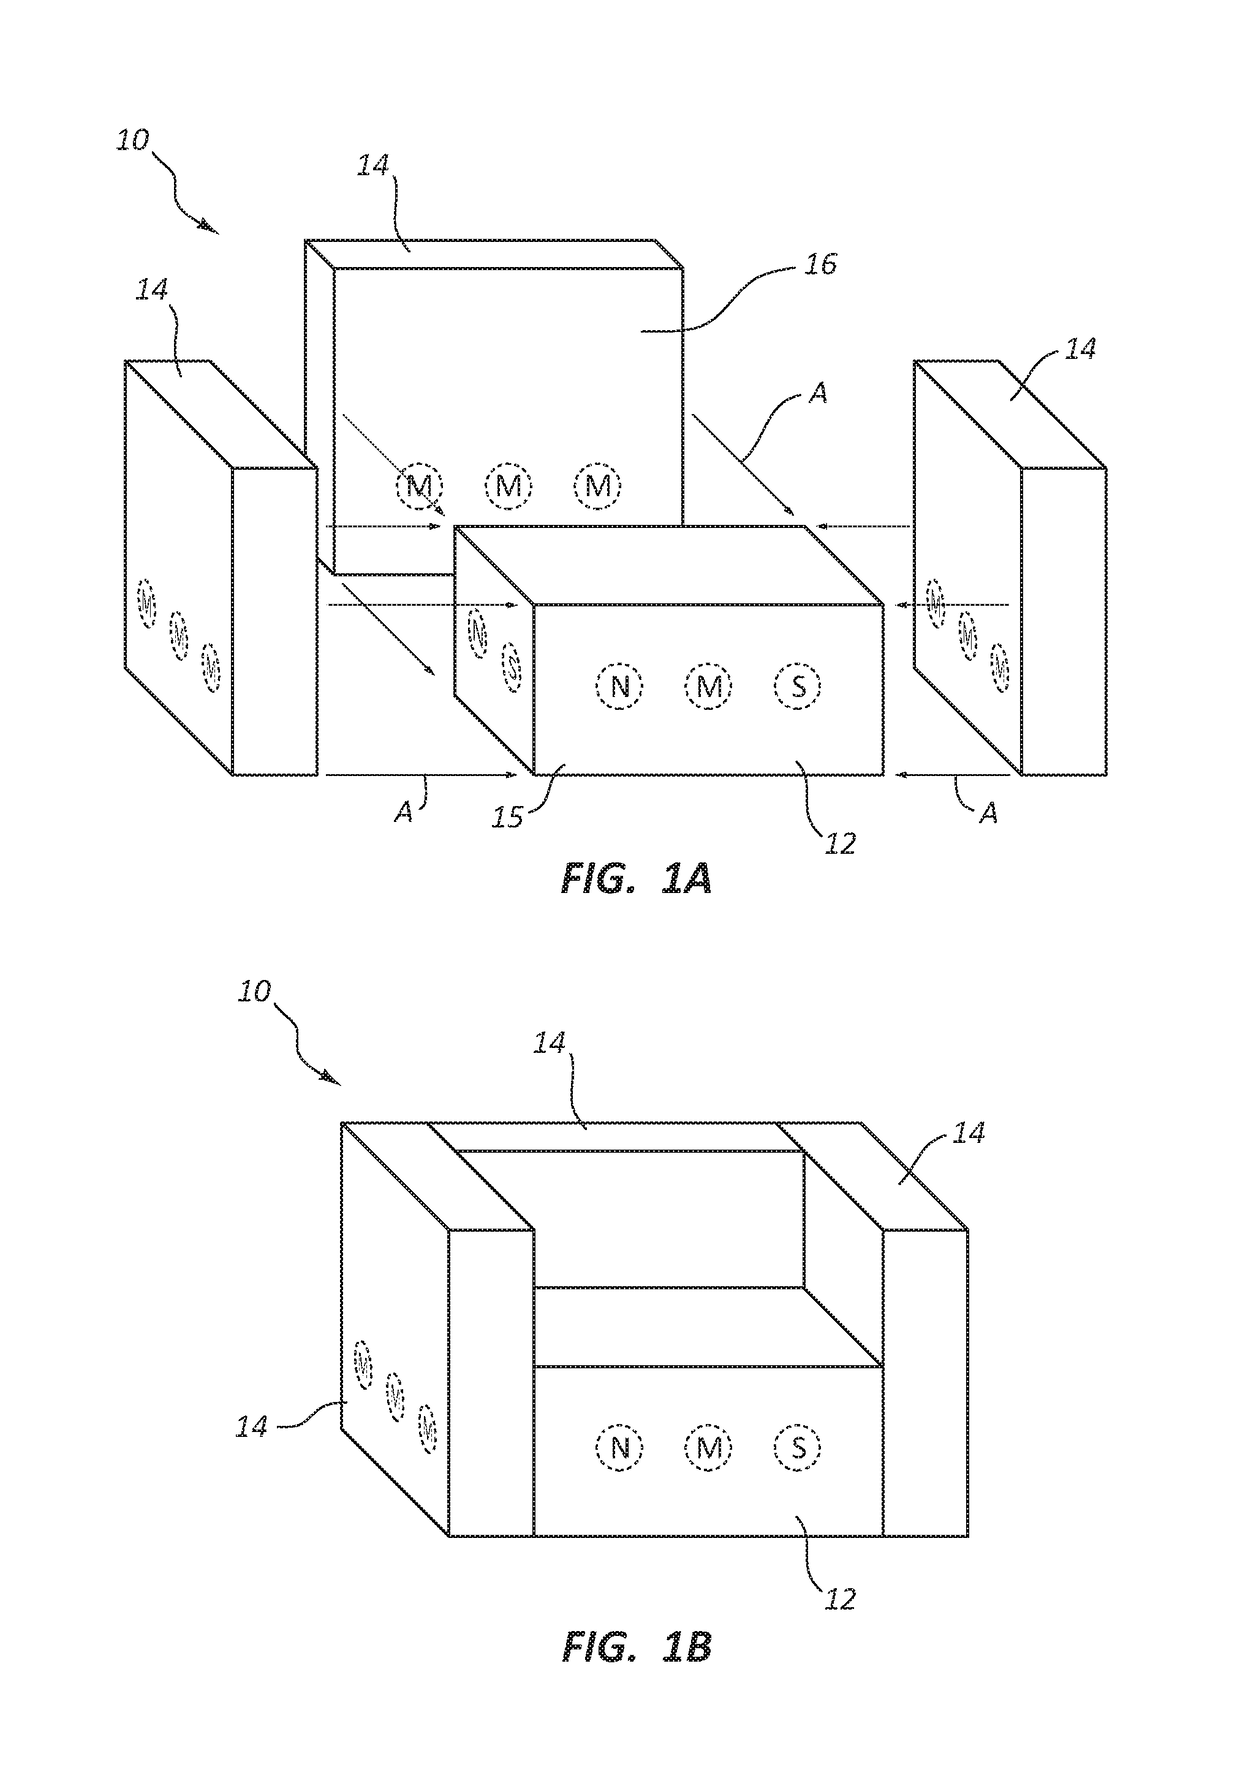 Modular furniture assembly with dual coupling mechanisms